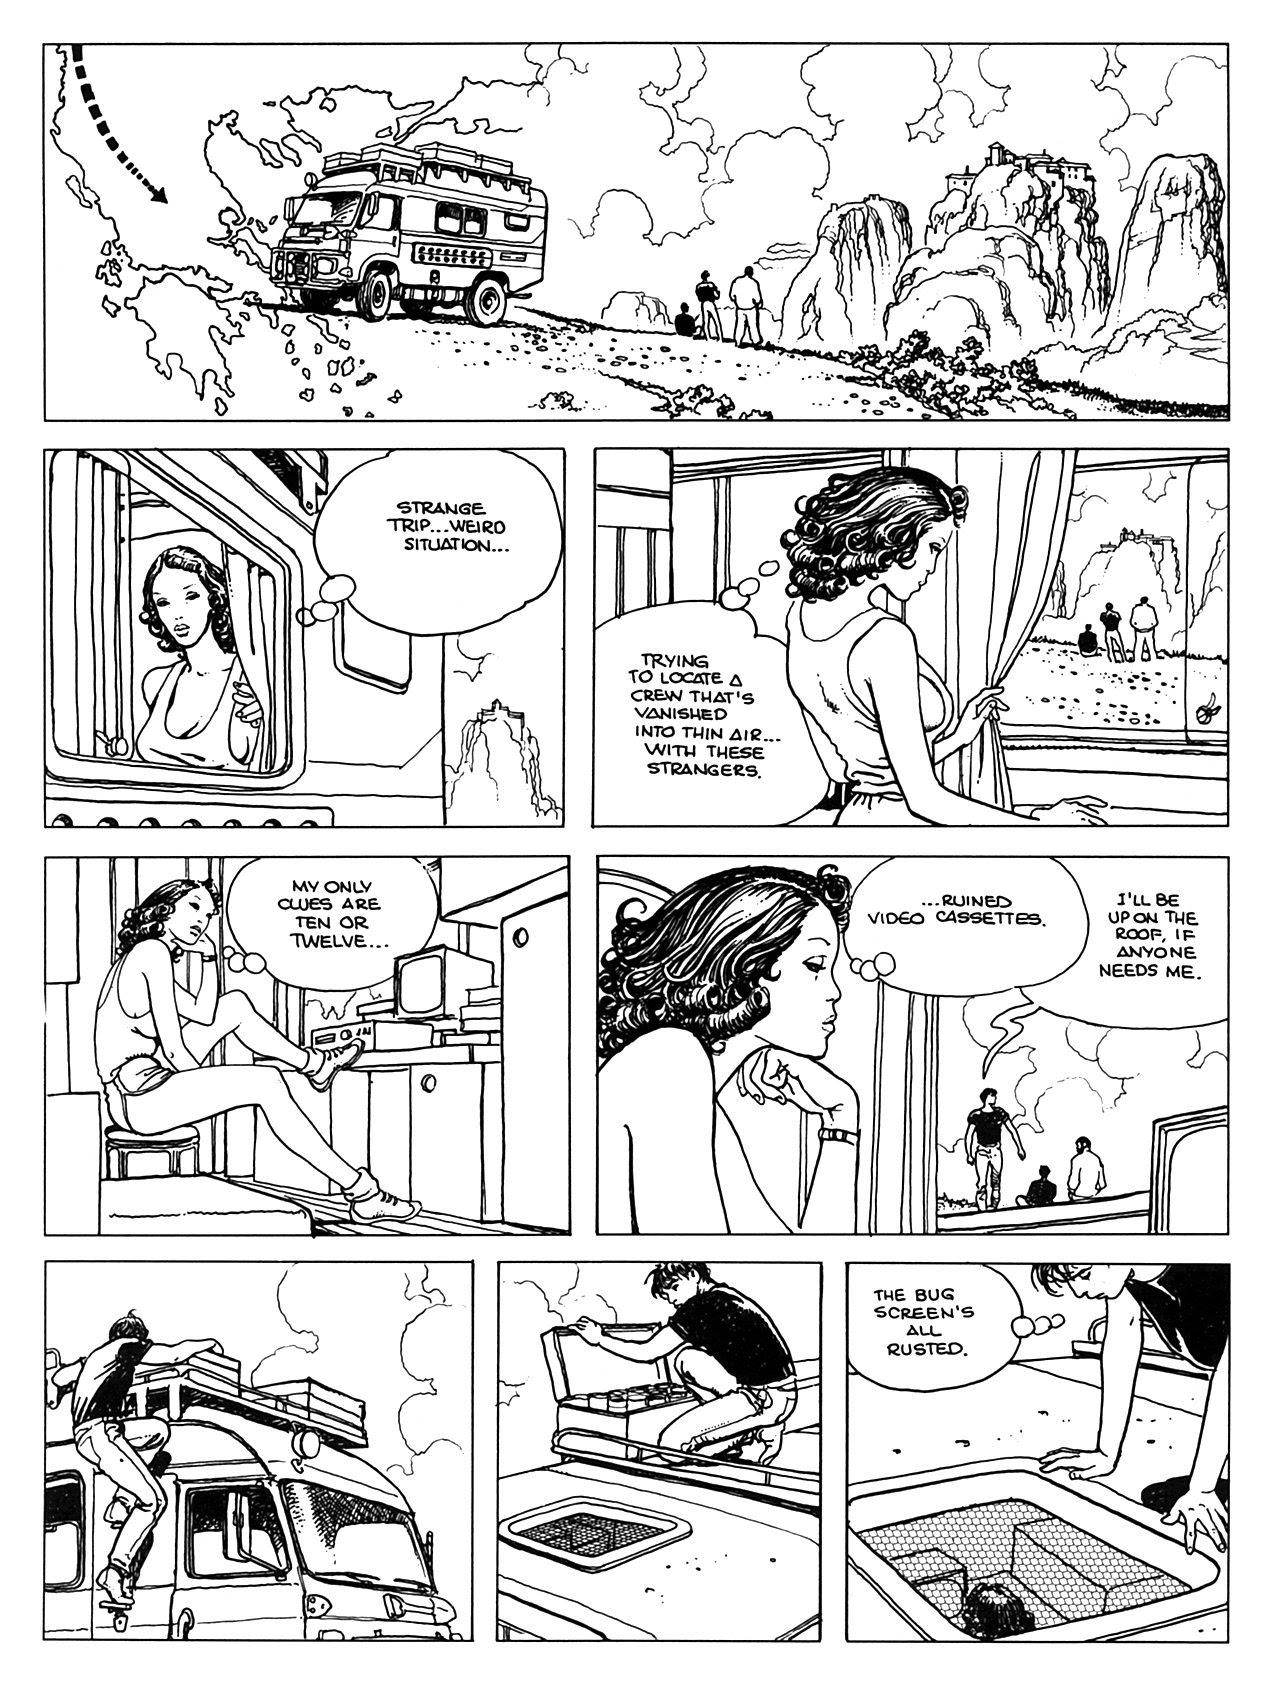 Read online Perchance to dream - The Indian adventures of Giuseppe Bergman comic -  Issue # TPB - 25